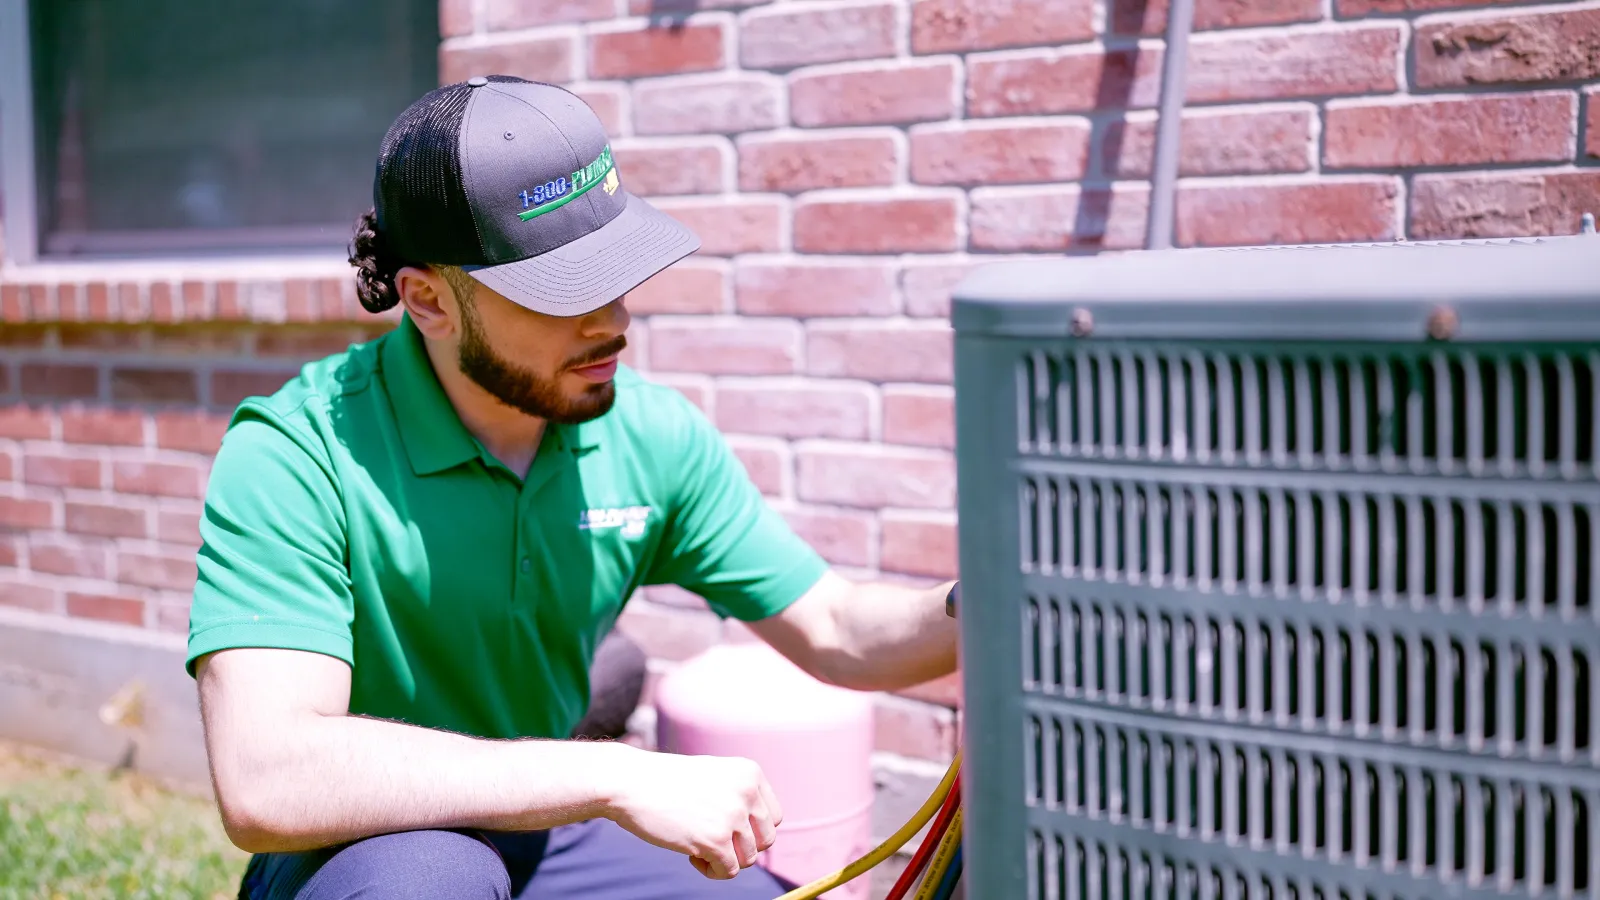 A Houston comercial heating technician repairing and outside heater